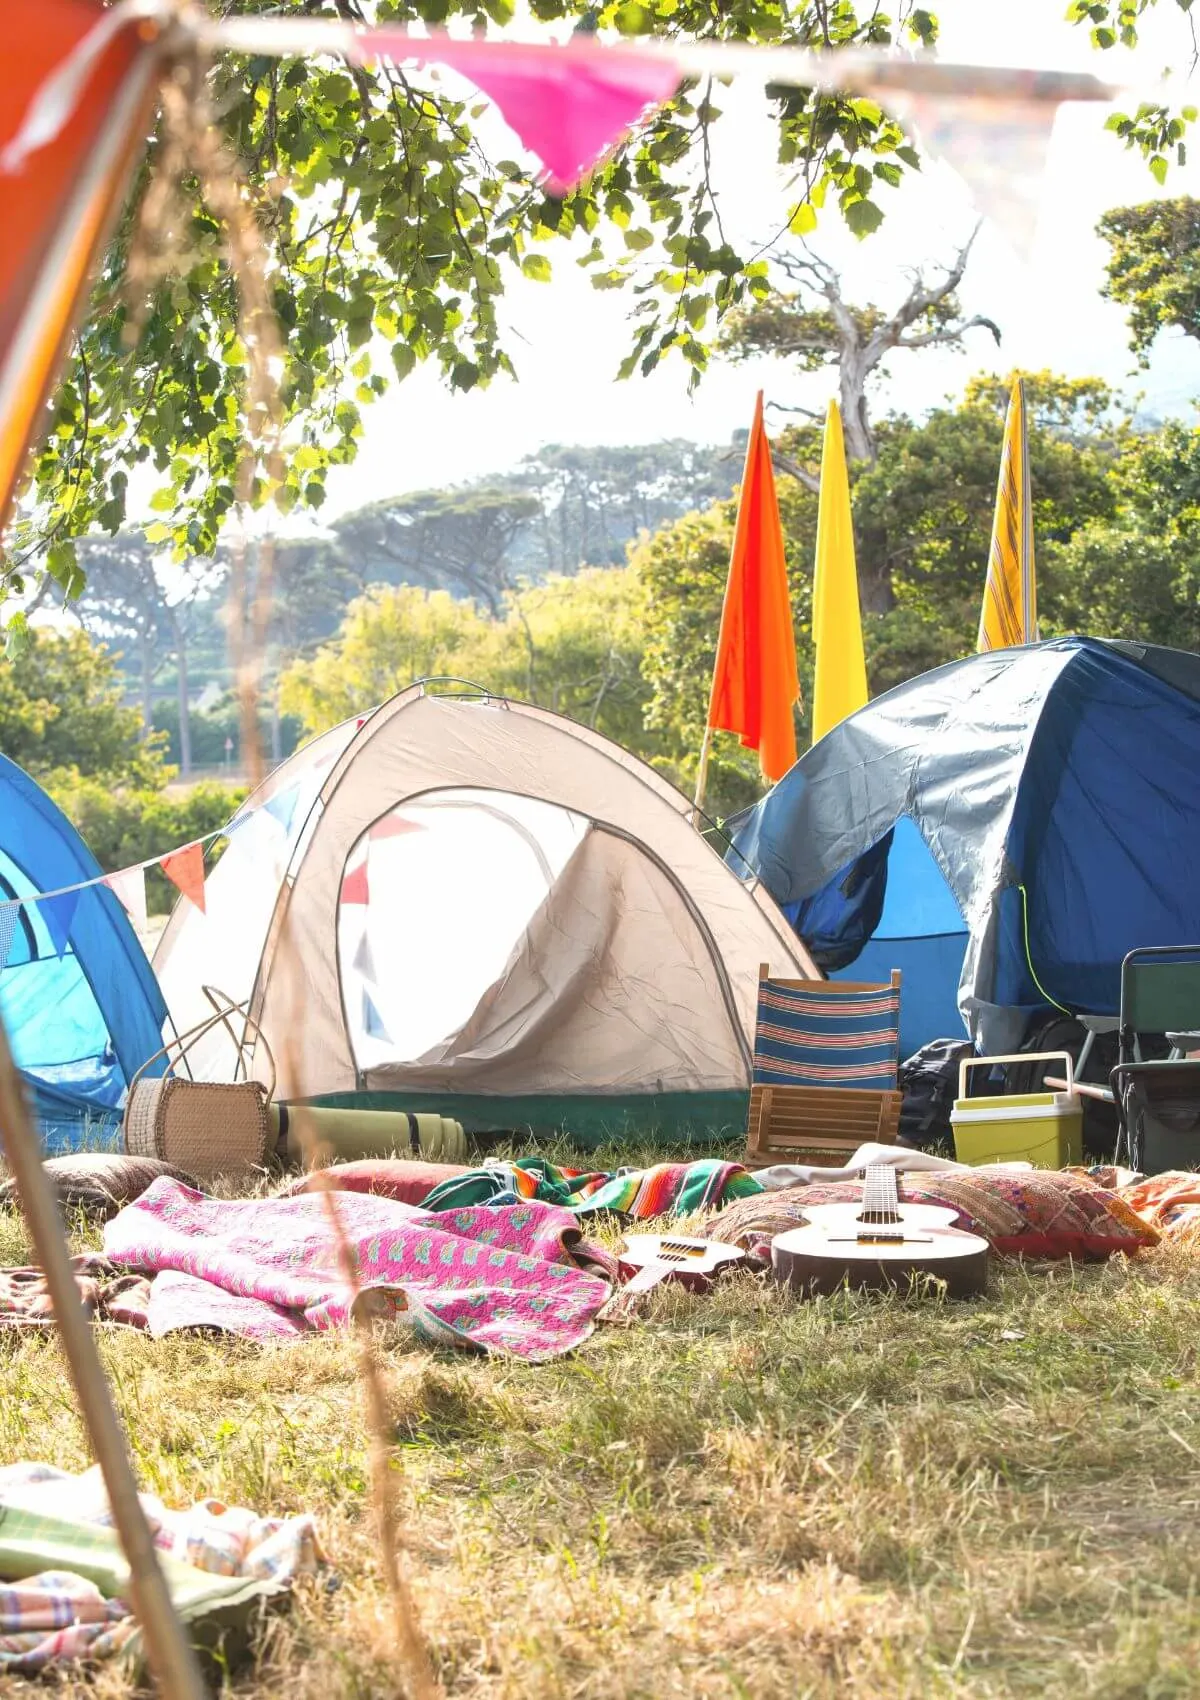 Adverteerder Roman Daar 11 Tips to Find the Best Place to Camp at Festivals